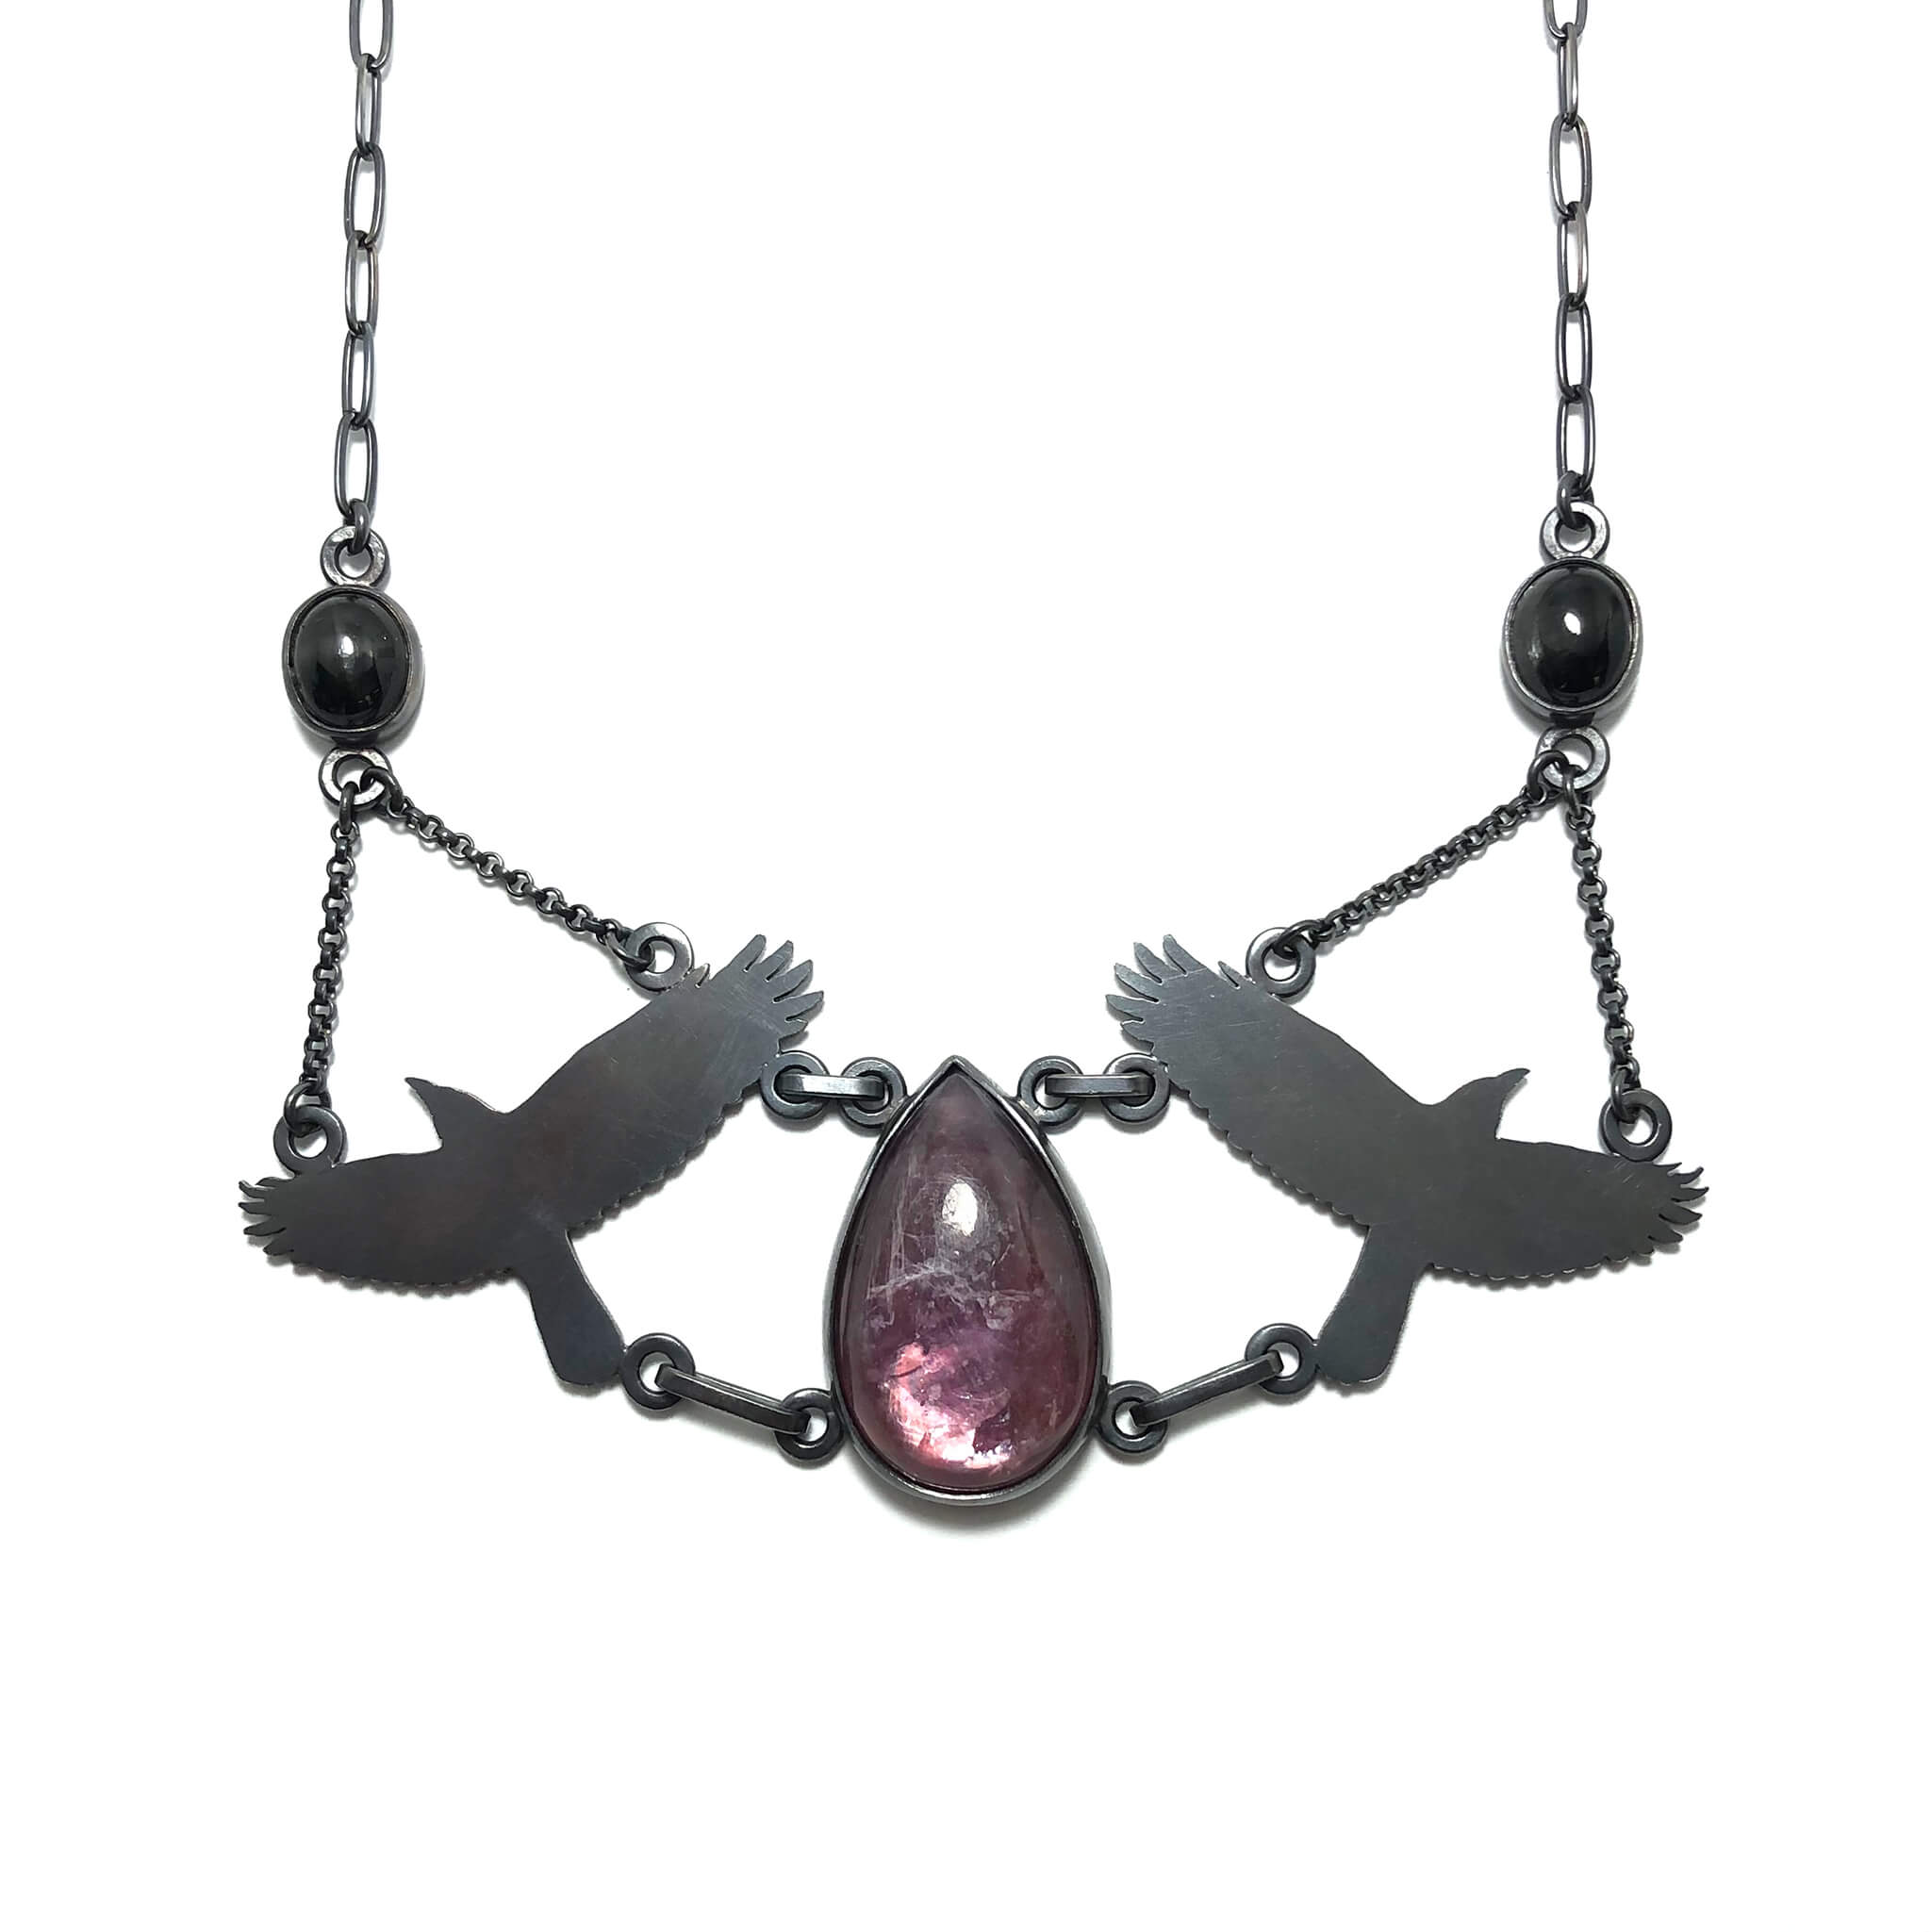 Gem Lepidolite + Black Star Dioptase Crow Goddess Necklace.  Set in oxidized sterling silver.  "Betwixt + Between" collection by Alex Lozier Jewelry + Salicrow